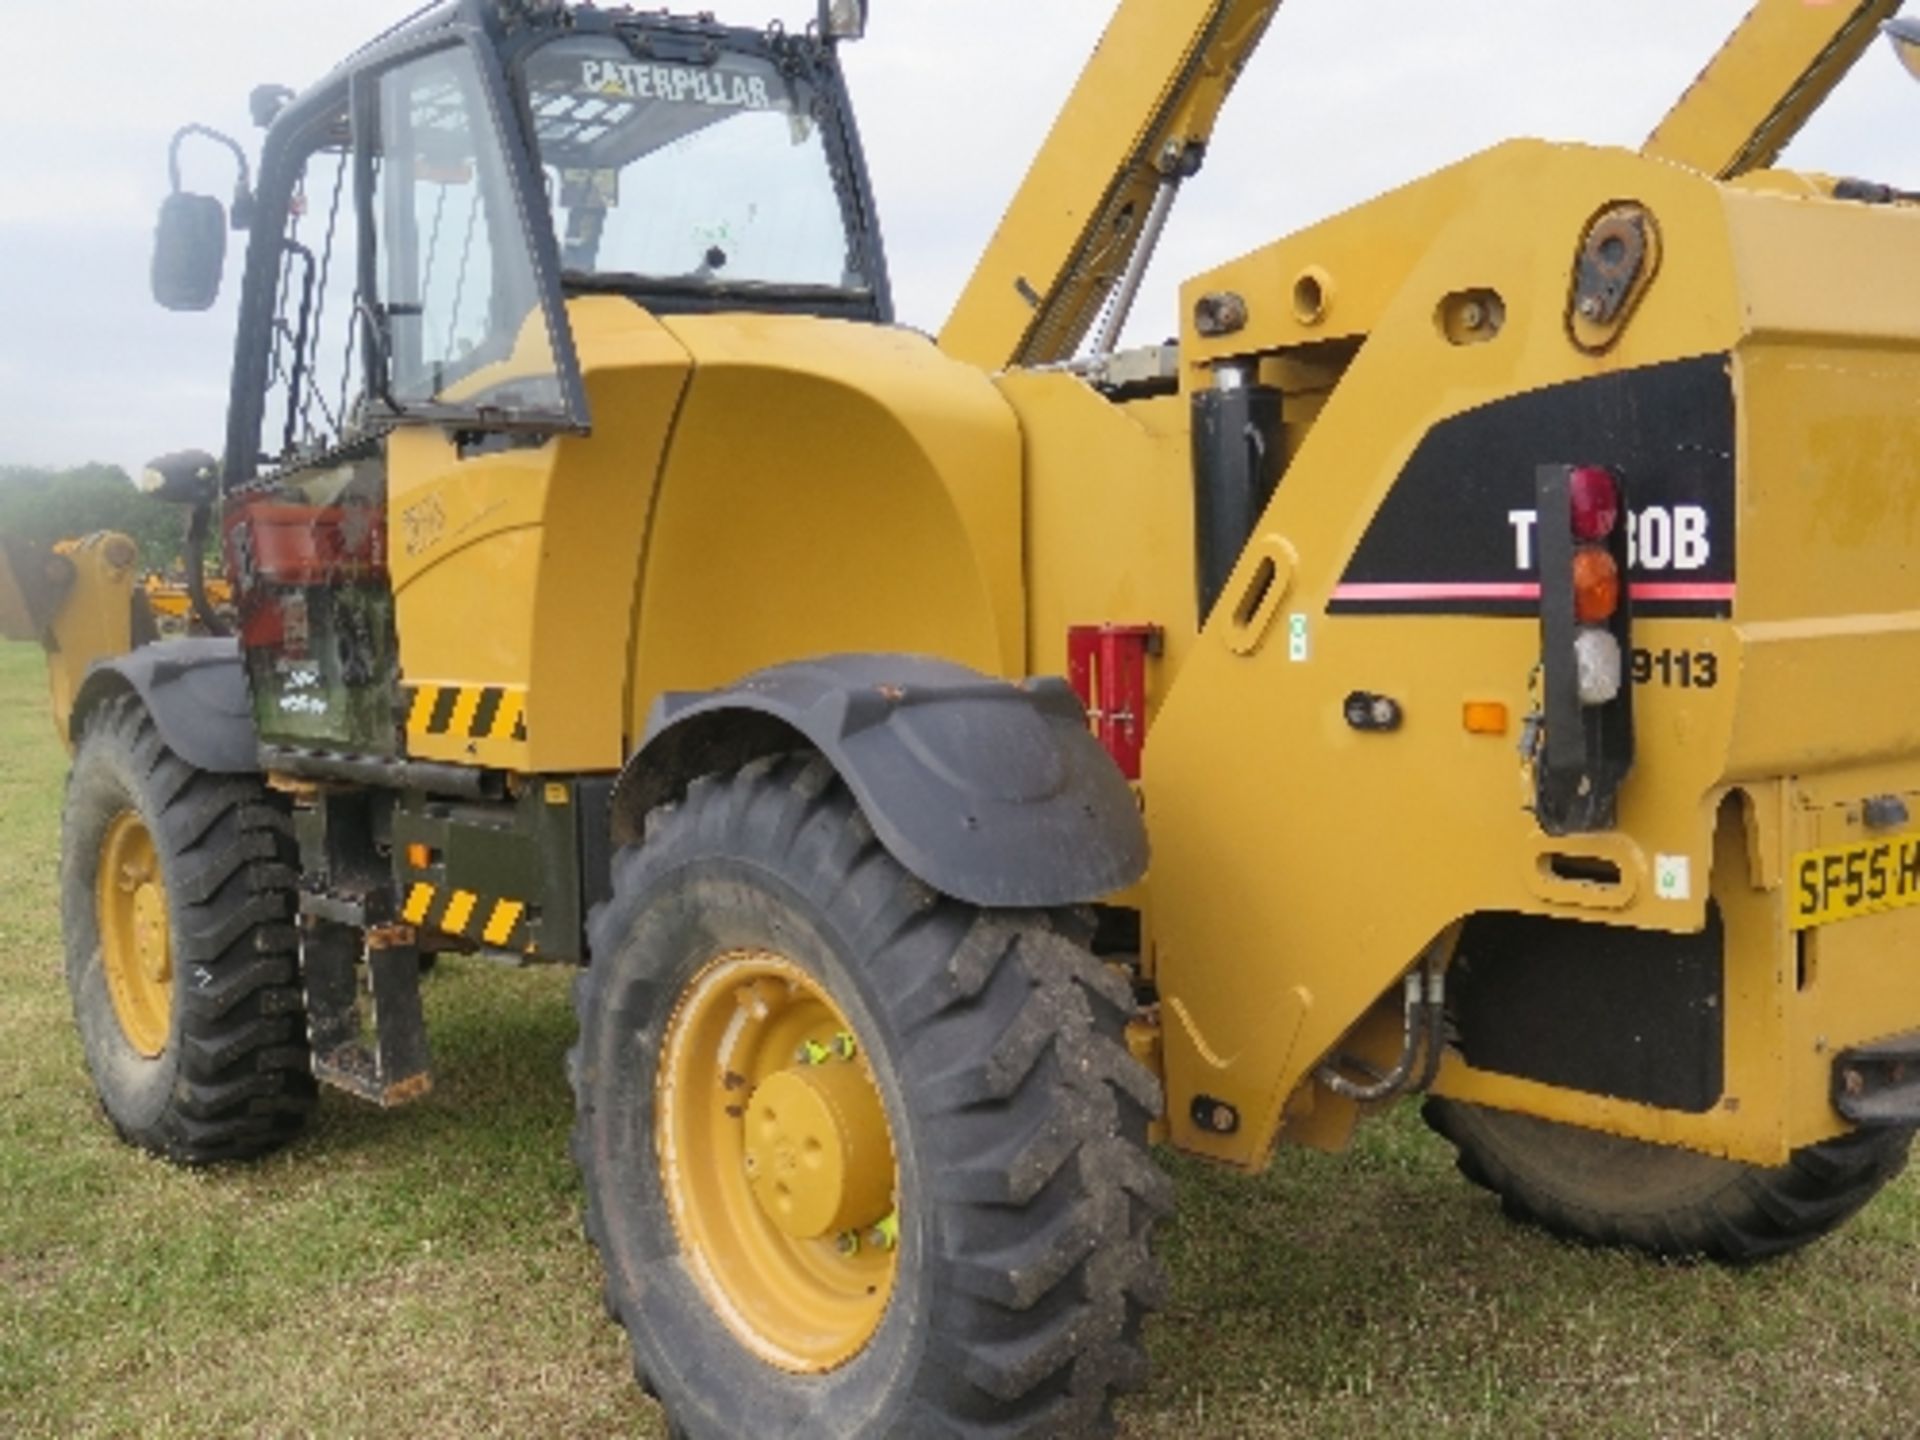 Caterpillar TH580B telehandler 5313 hrs 2006 139113 Please note this machine will be retained - Image 2 of 7